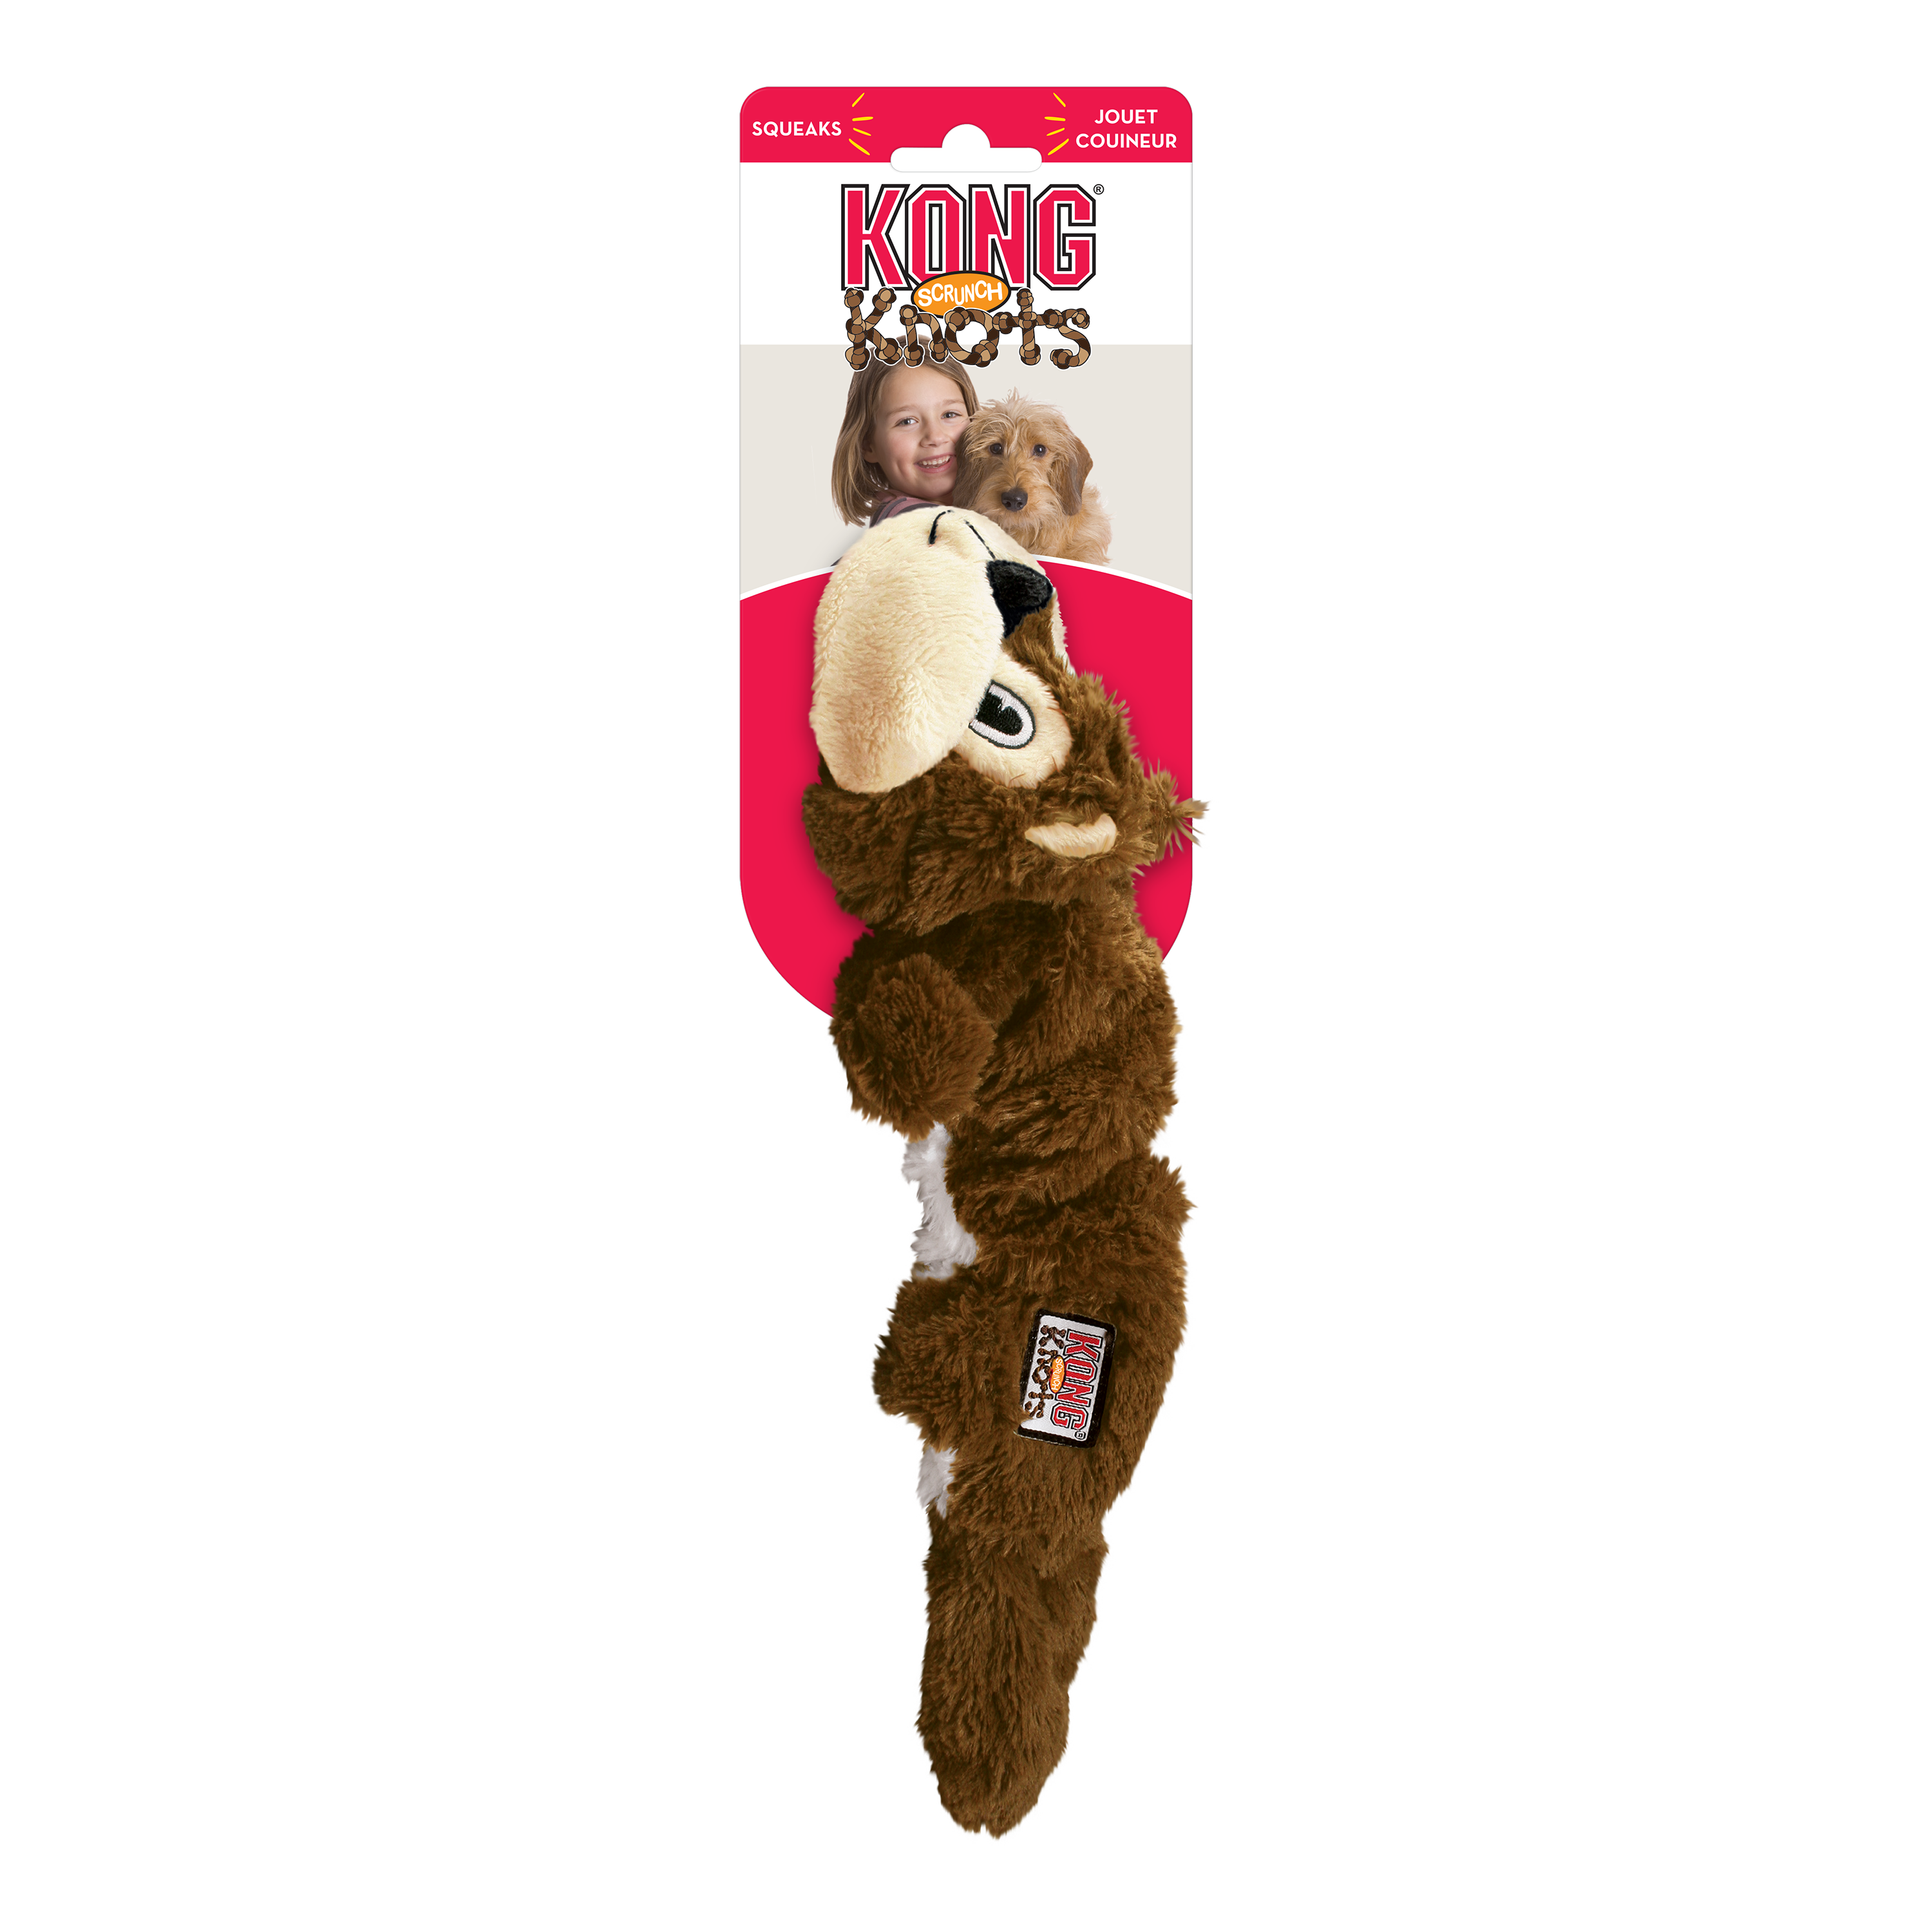 Scrunch Knots Squirrel onpack product image